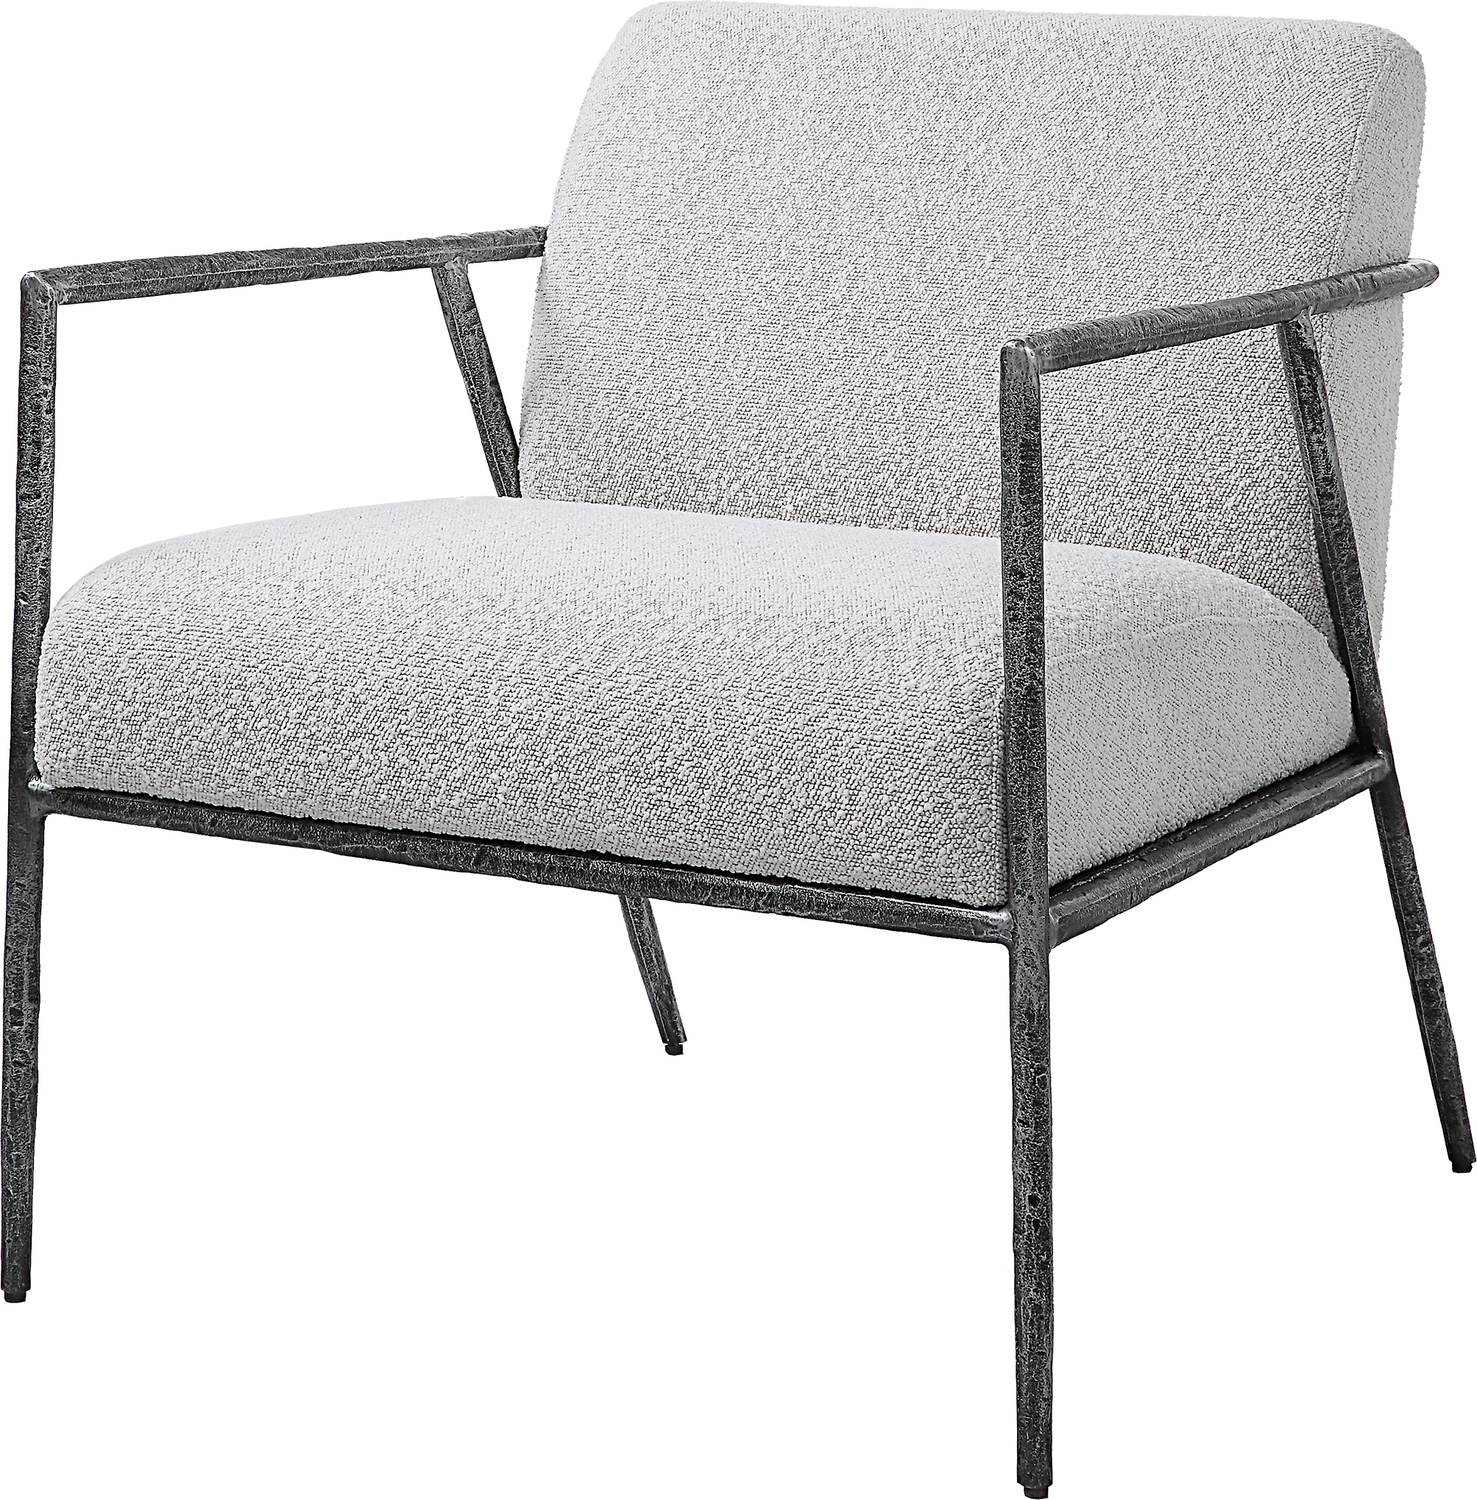 mid century chairs for living room Uttermost Accent Chairs & Armchairs With Clean Contemporary Lines, This Open Frame Design Features A Textured Cast Iron Frame In A Natural Distressed Charcoal Finish. Paired With A Tight Upholstered Seat In A Casual Ivory And Warm Gray Boucle Fabric. Seat Height Is 18".